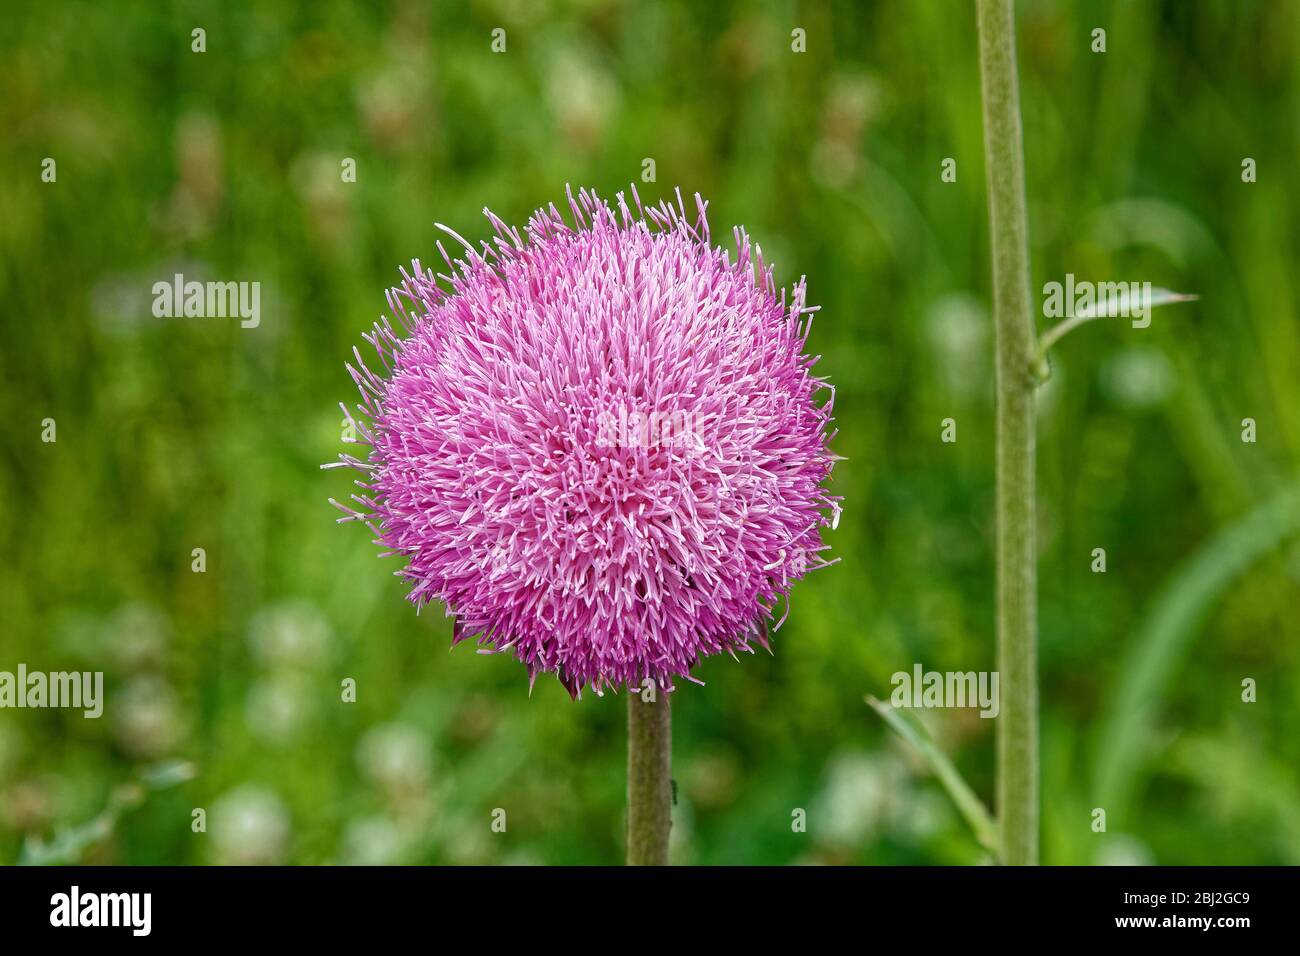 lavender wildflower, ball shape, Nodding Thistle, Musk Thistle, Cardus nutans, invasive weed, nature, Kentucky, KY, USA, spring Stock Photo